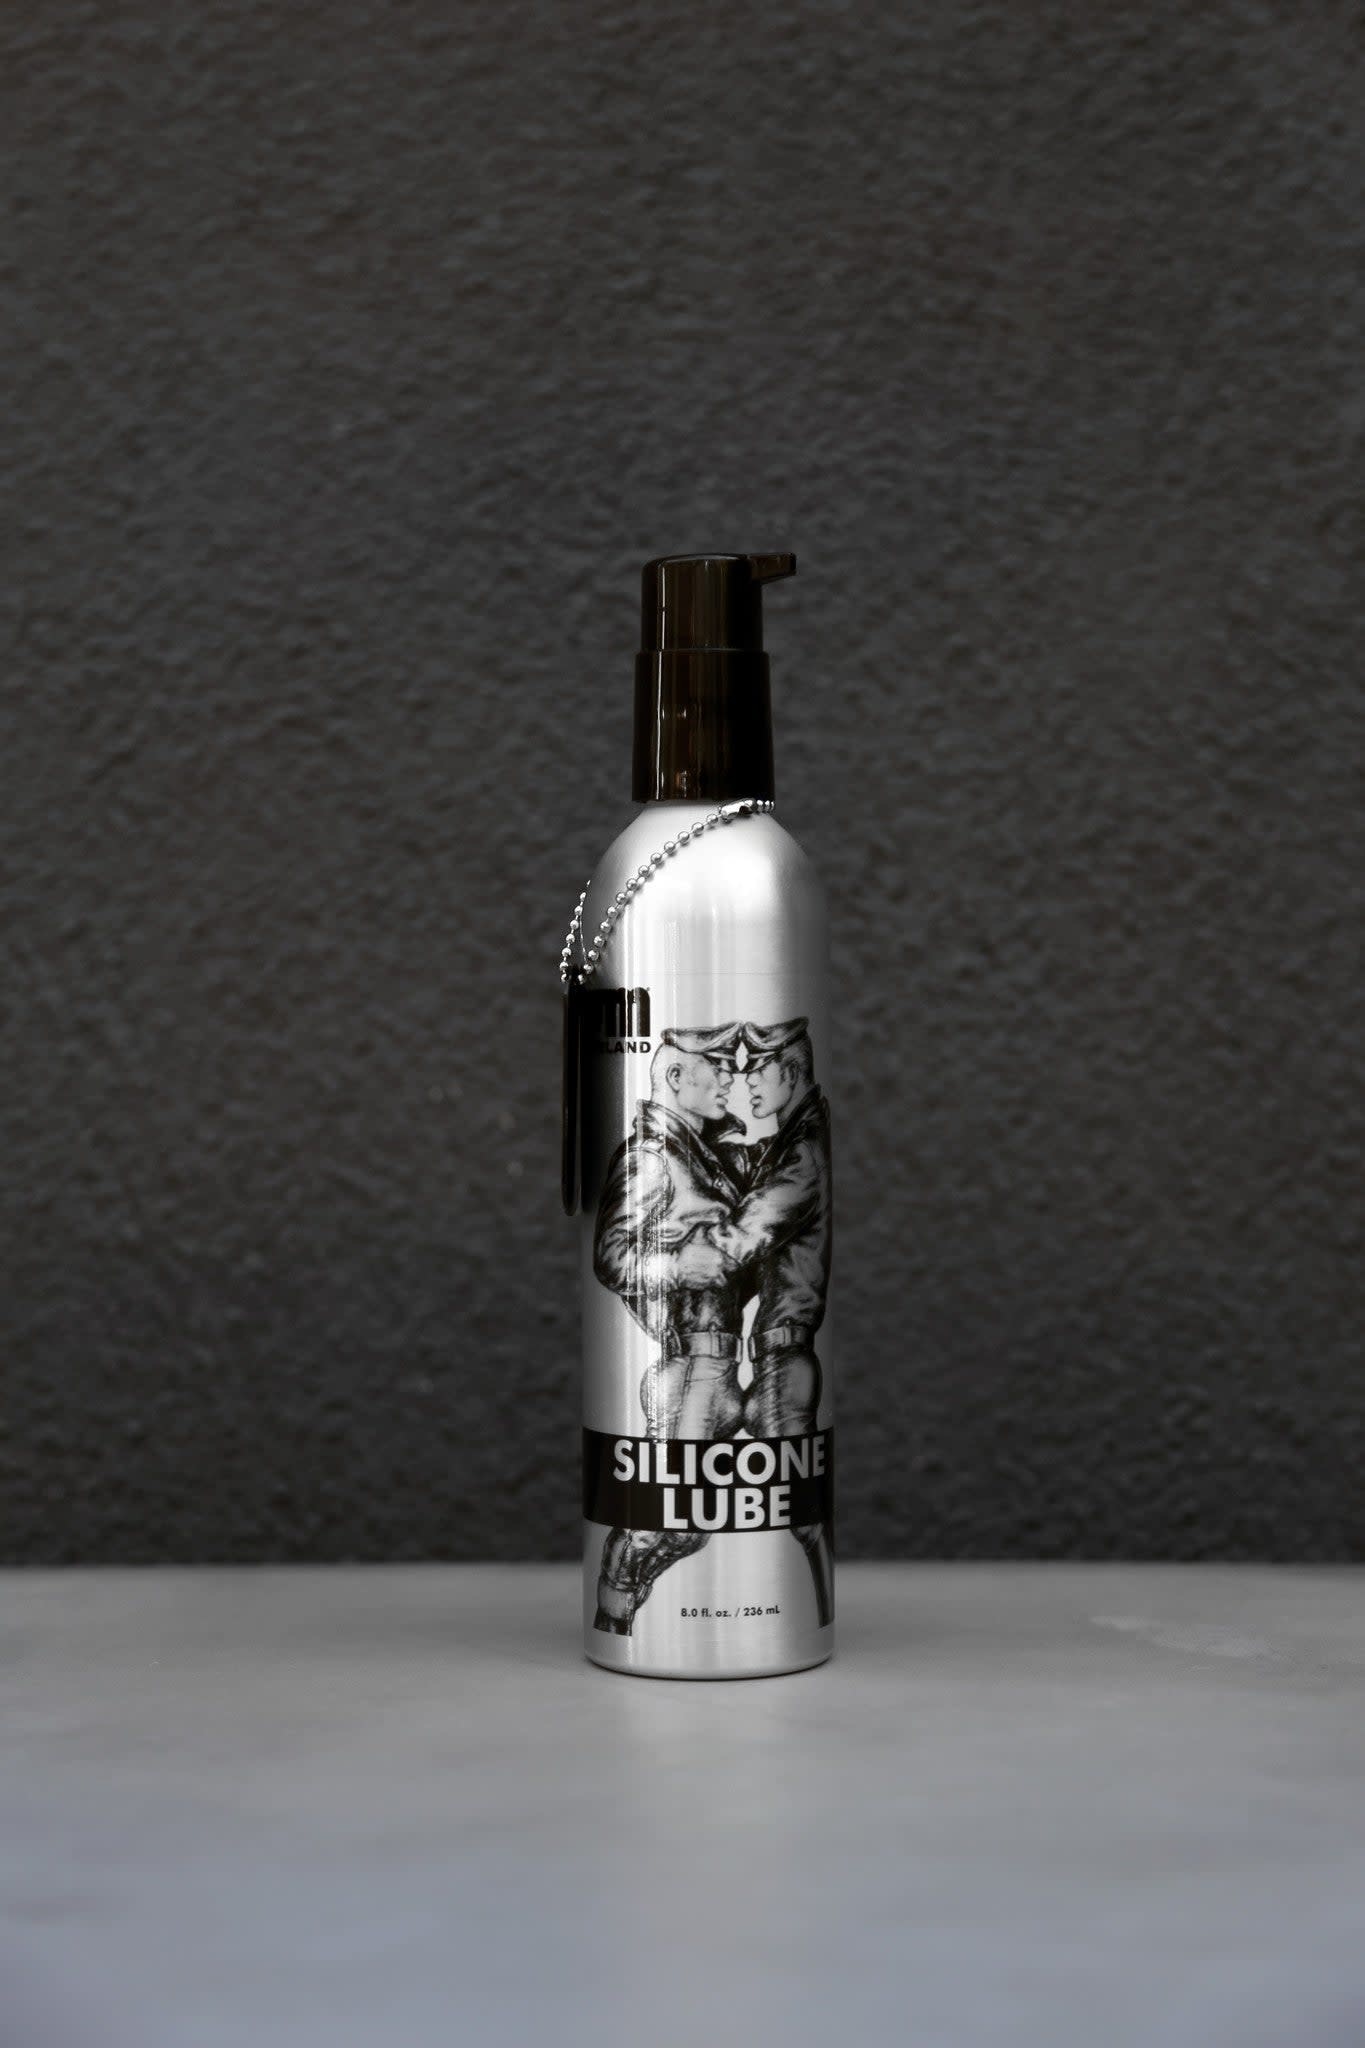 Tom of Finland Silicone Lube